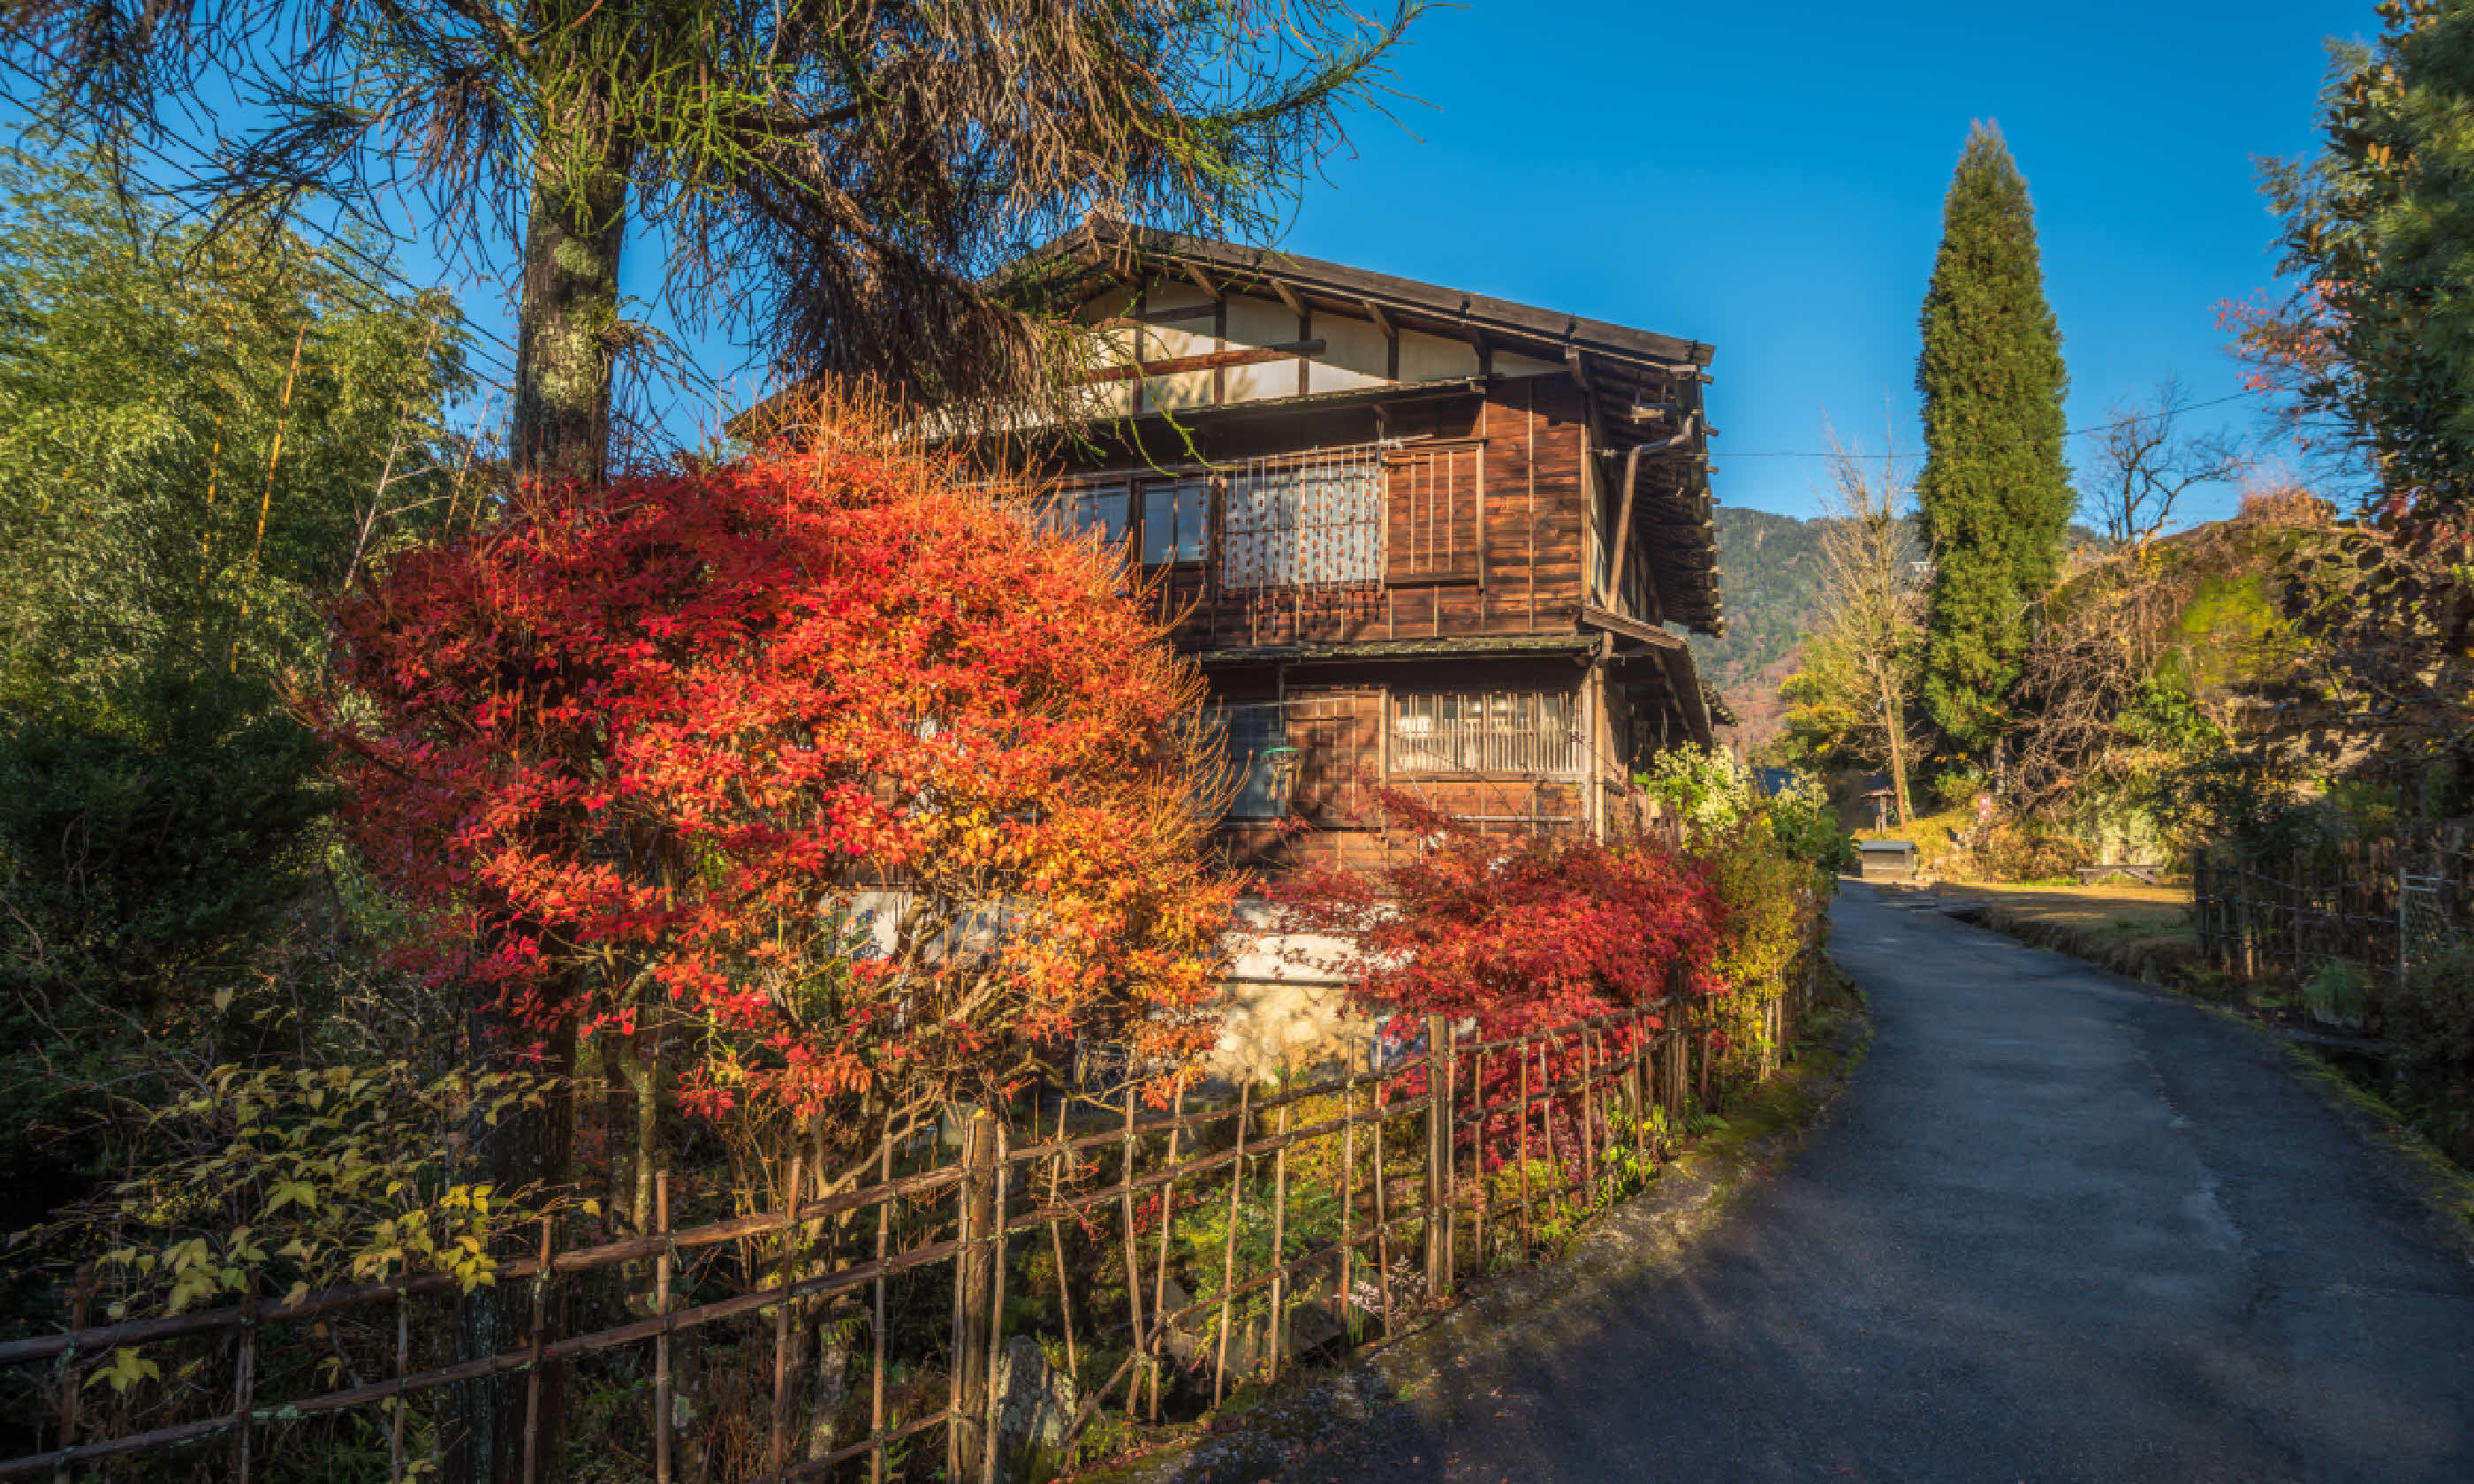 Tsumago, scenic traditional post town in Japan (Shutterstock: see credit below)